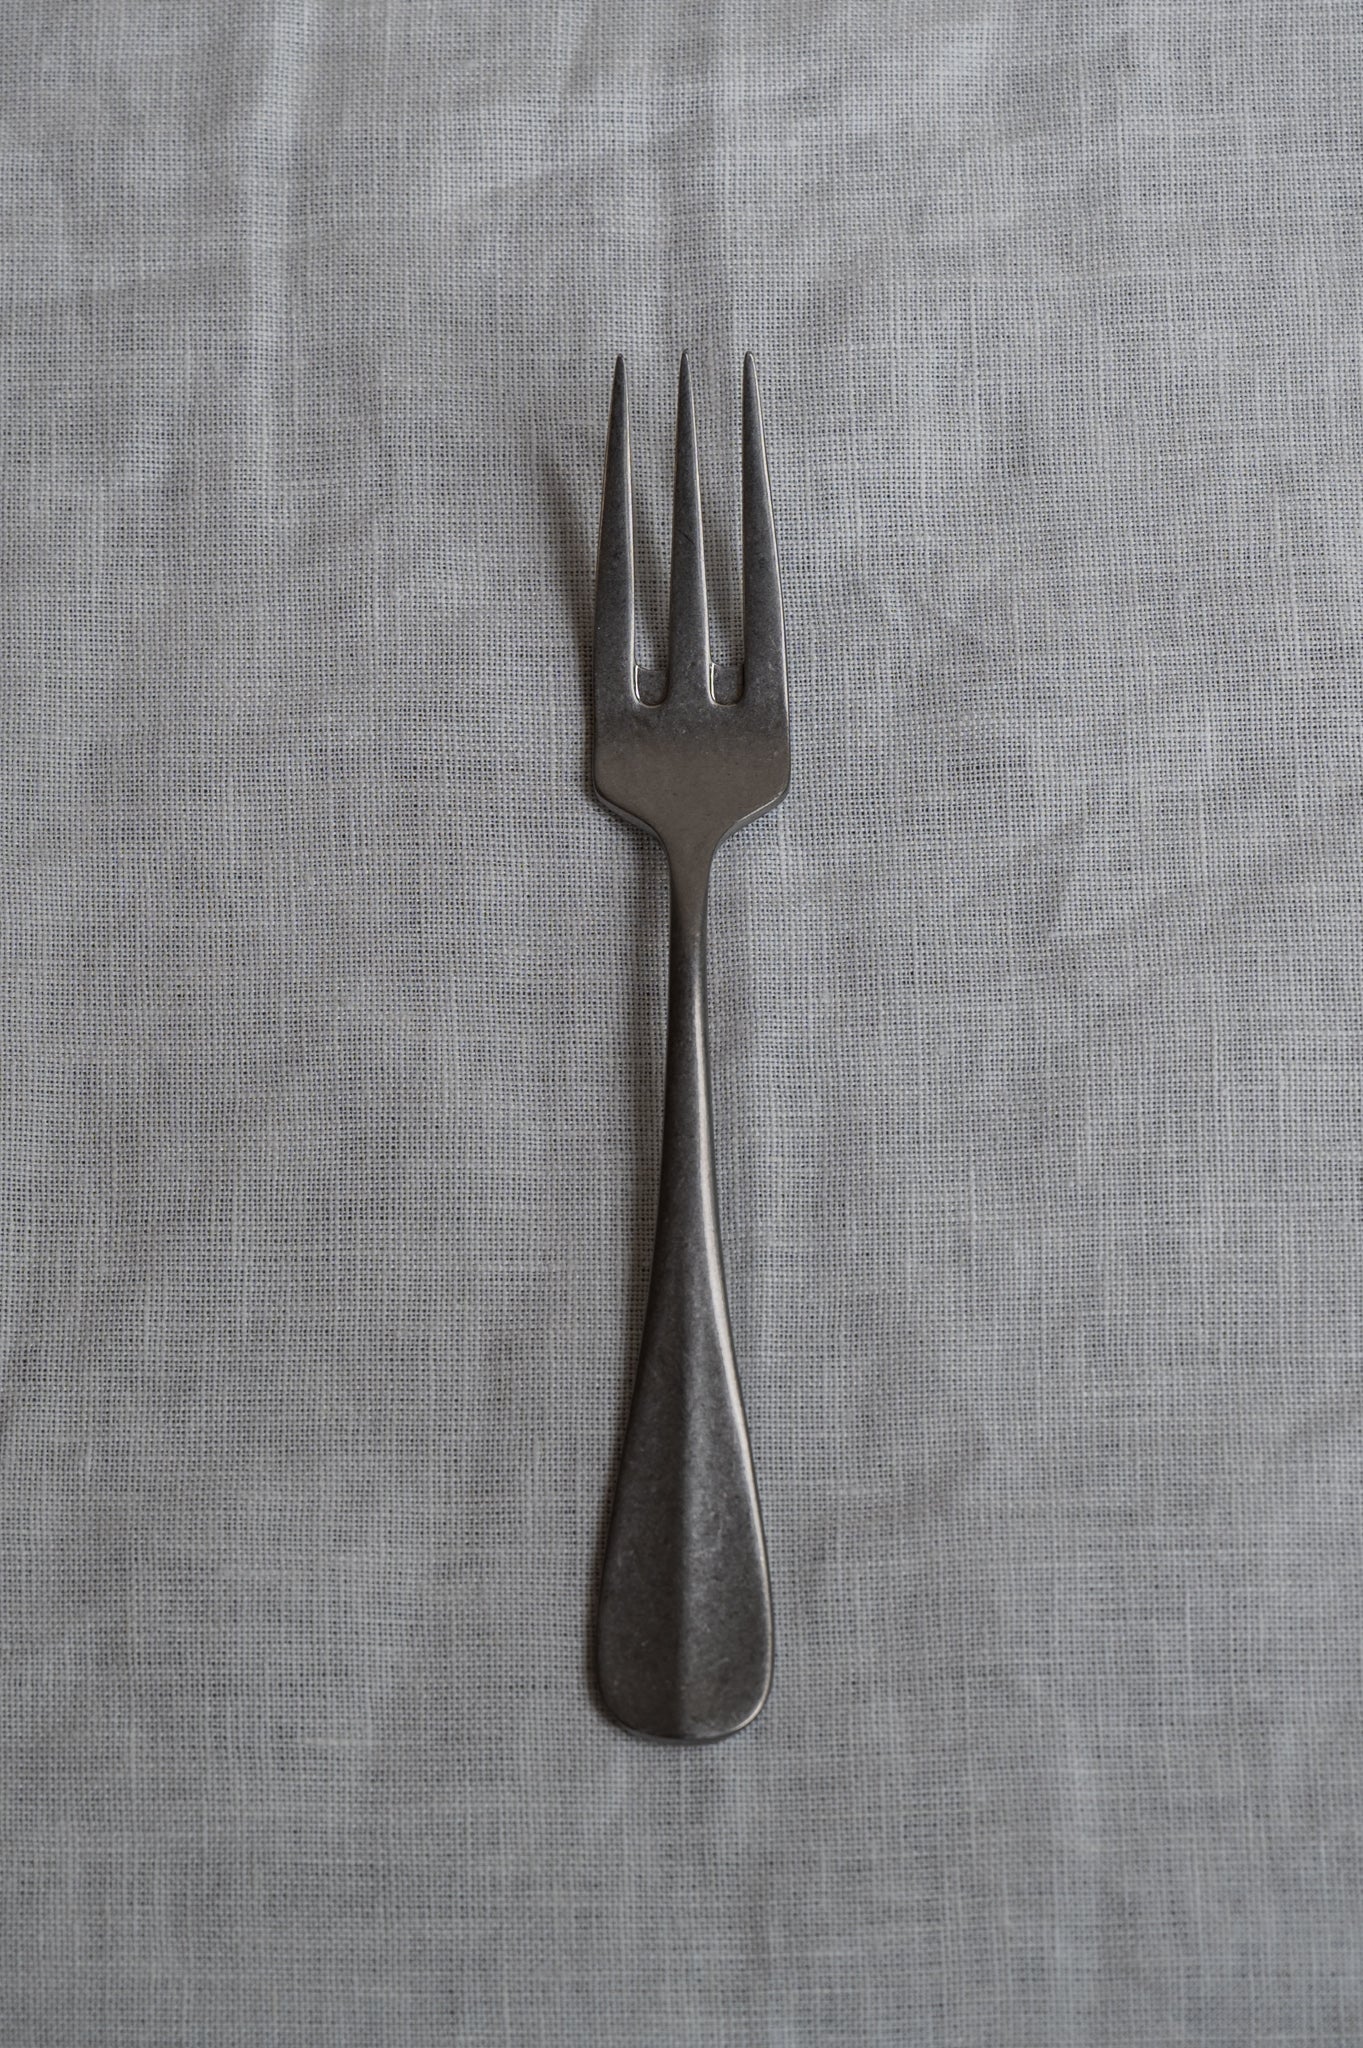 Fish Fork from the Baguette Vintage Serving Cutlery collection by Sambonet.